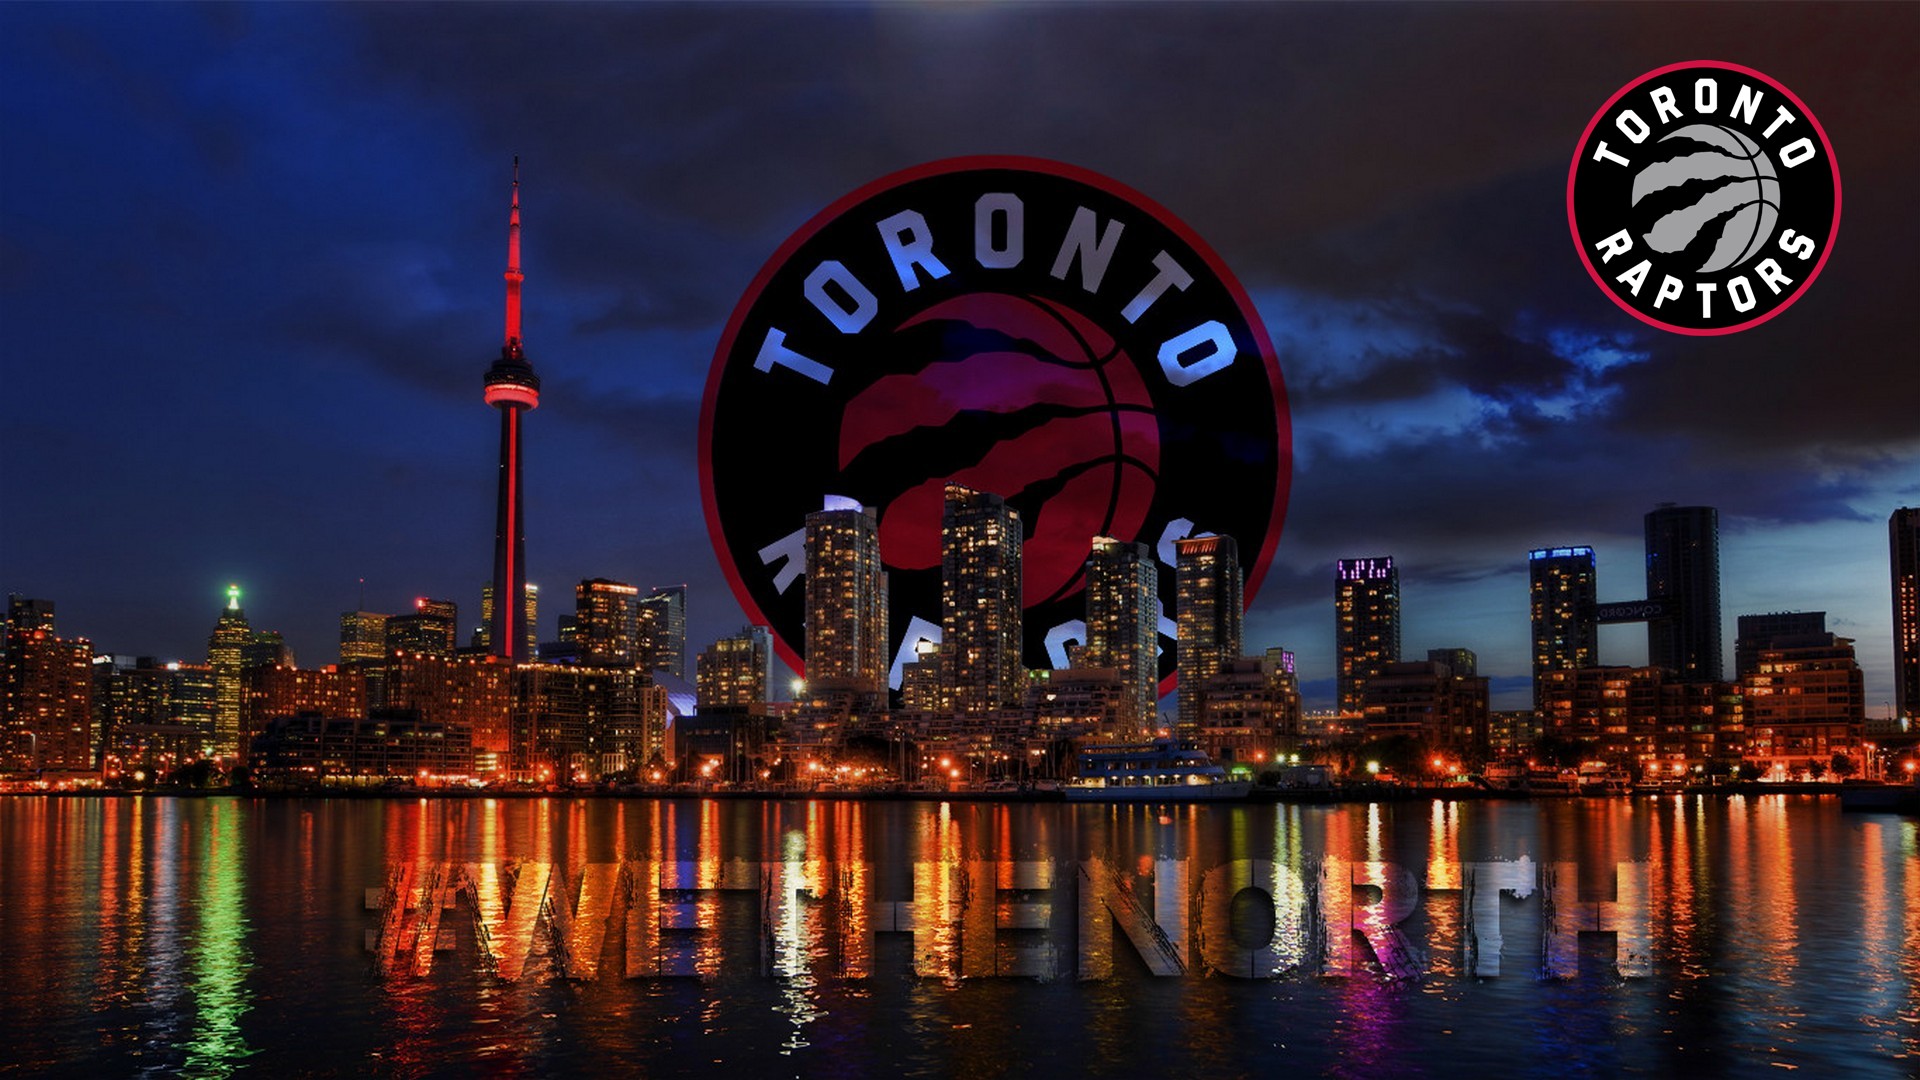 HD Toronto Raptors Wallpapers with image dimensions 1920x1080 pixel. You can make this wallpaper for your Desktop Computer Backgrounds, Windows or Mac Screensavers, iPhone Lock screen, Tablet or Android and another Mobile Phone device